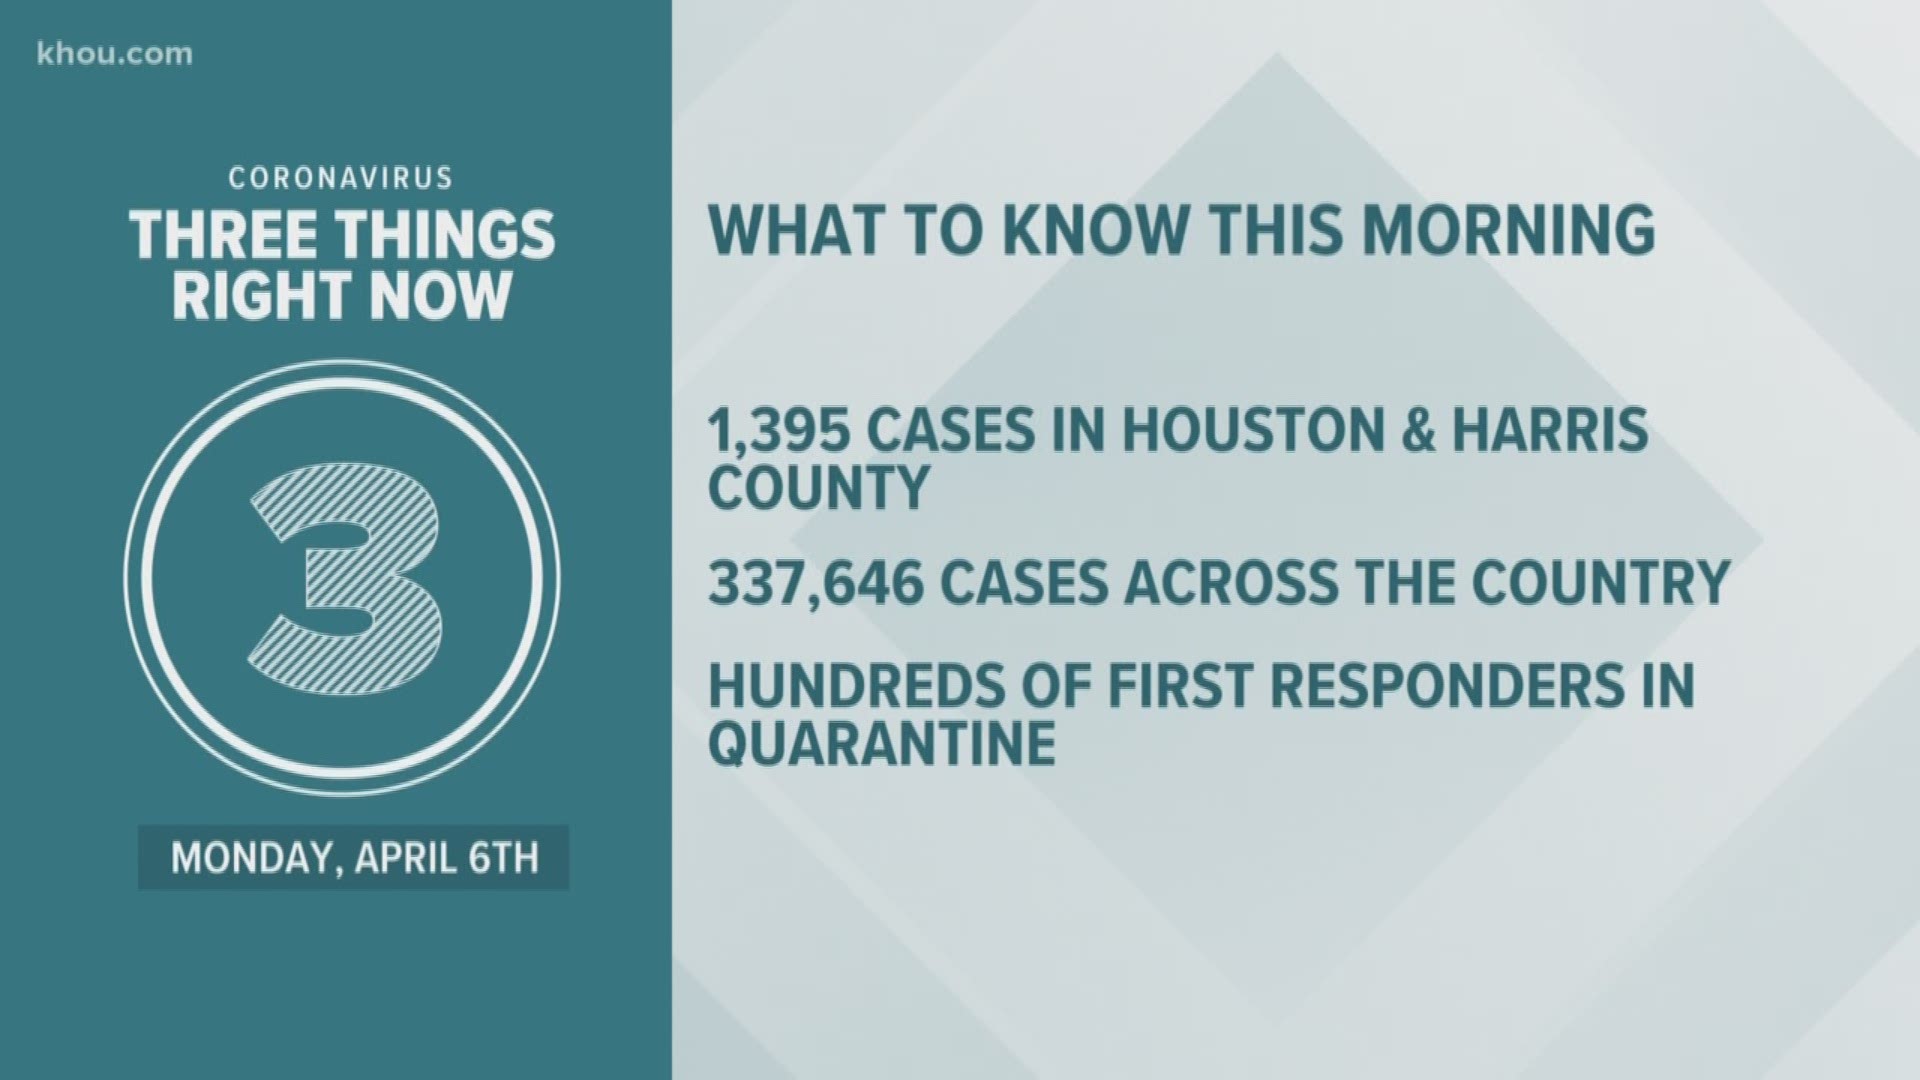 Here is a look at the latest COVID-19 headlines from around Houston, Texas, and the world for Monday, April 6.